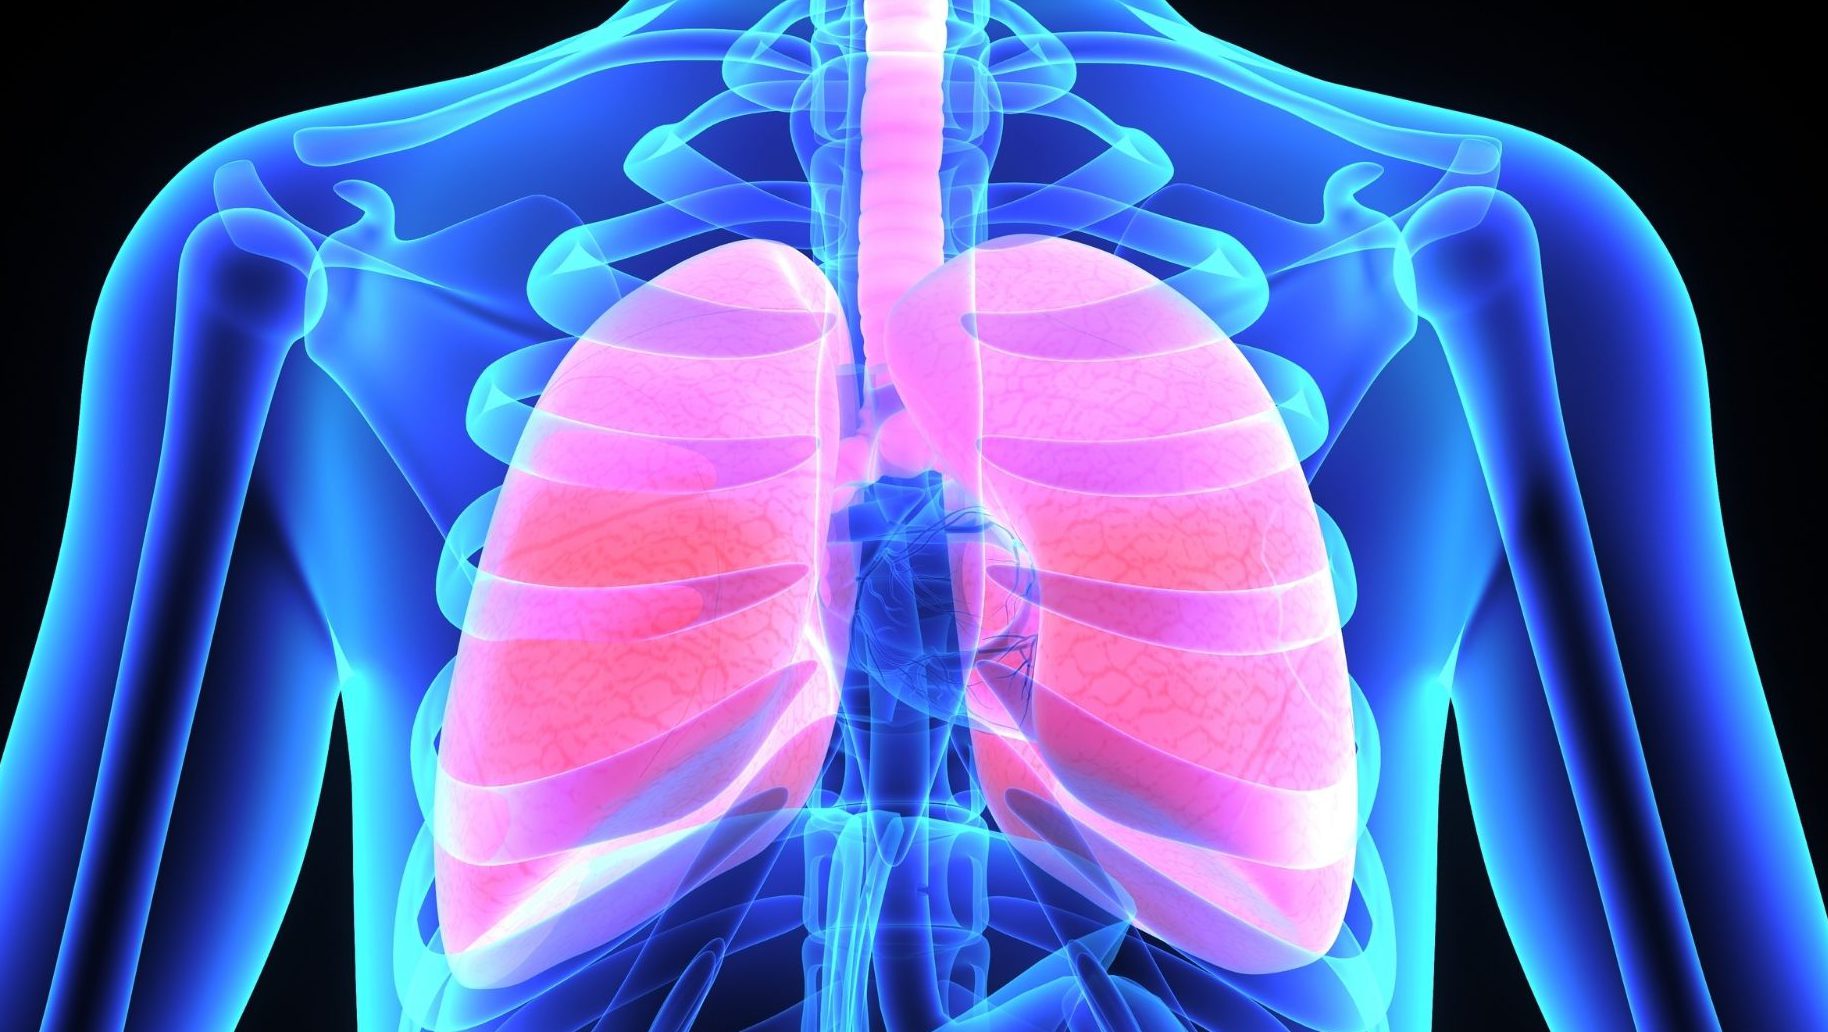 Global Pulmonary Arterial Hypertension Market Overview And Prospects – Includes Pulmonary Arterial Hypertension Market Share